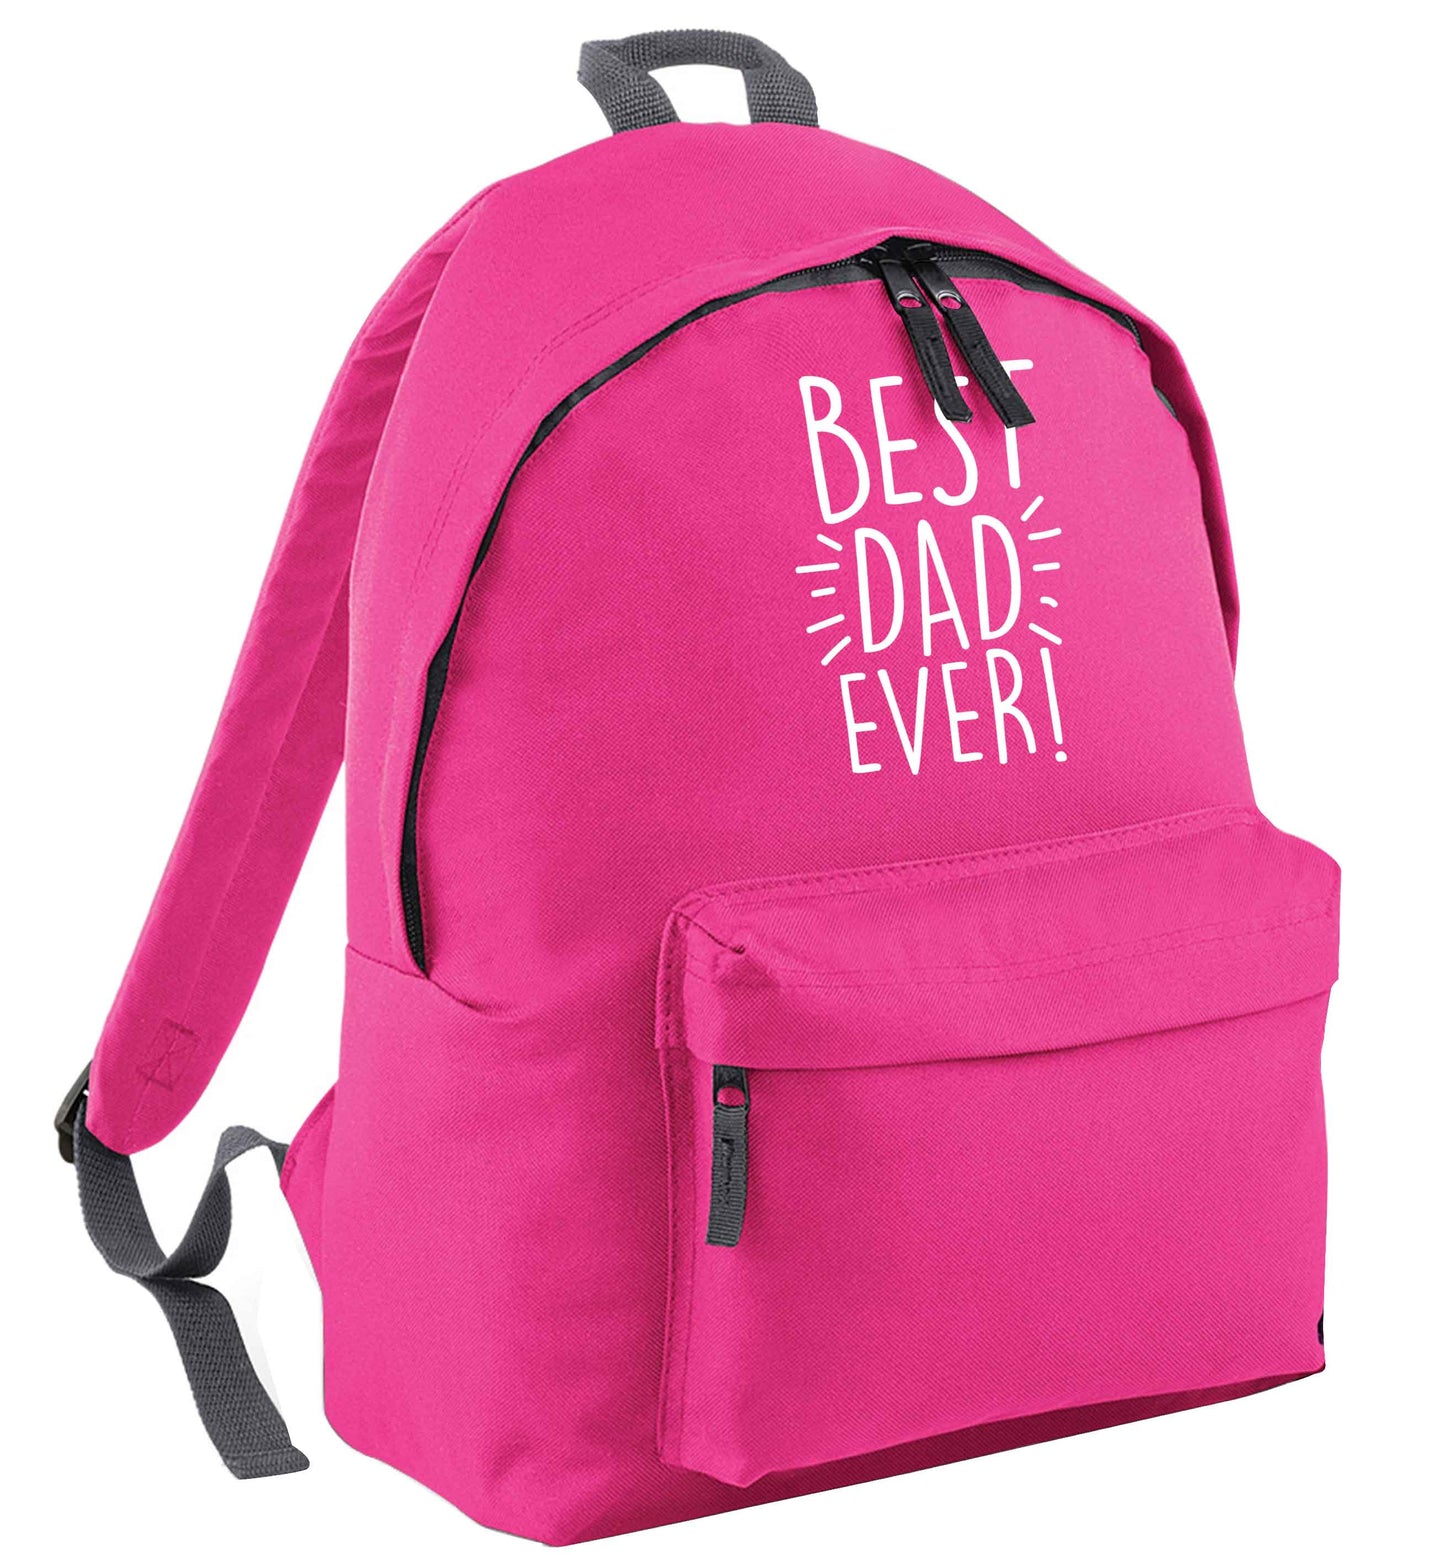 Best dad ever! pink adults backpack